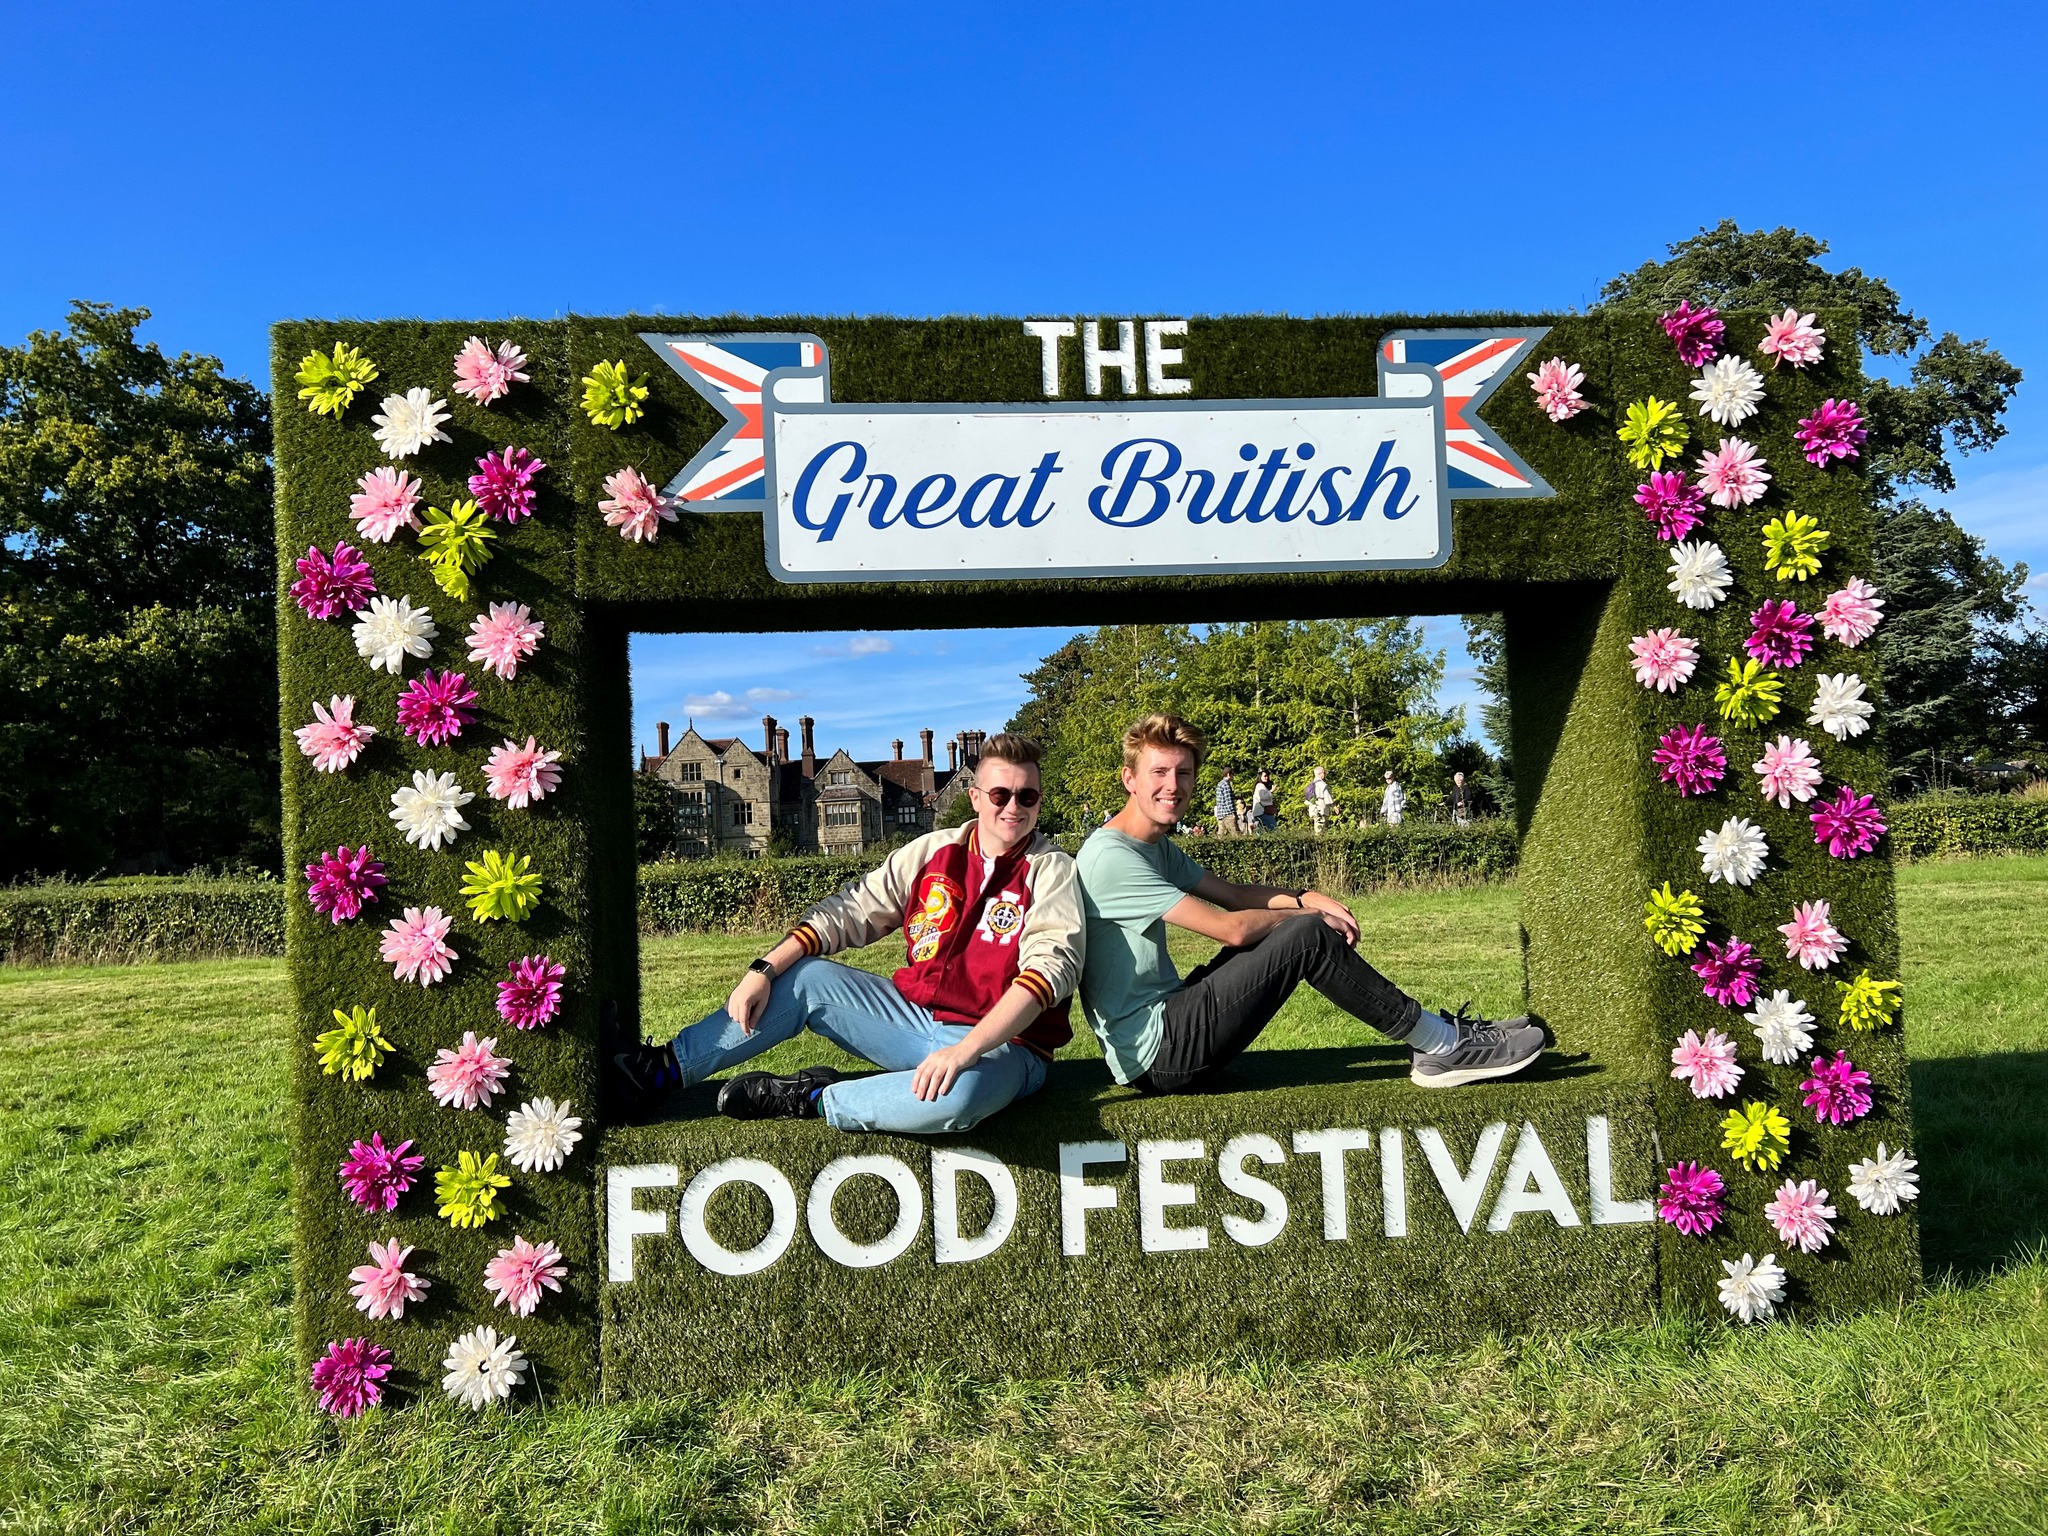 Two Man sat in a Picture frame for The Great British Food Festival